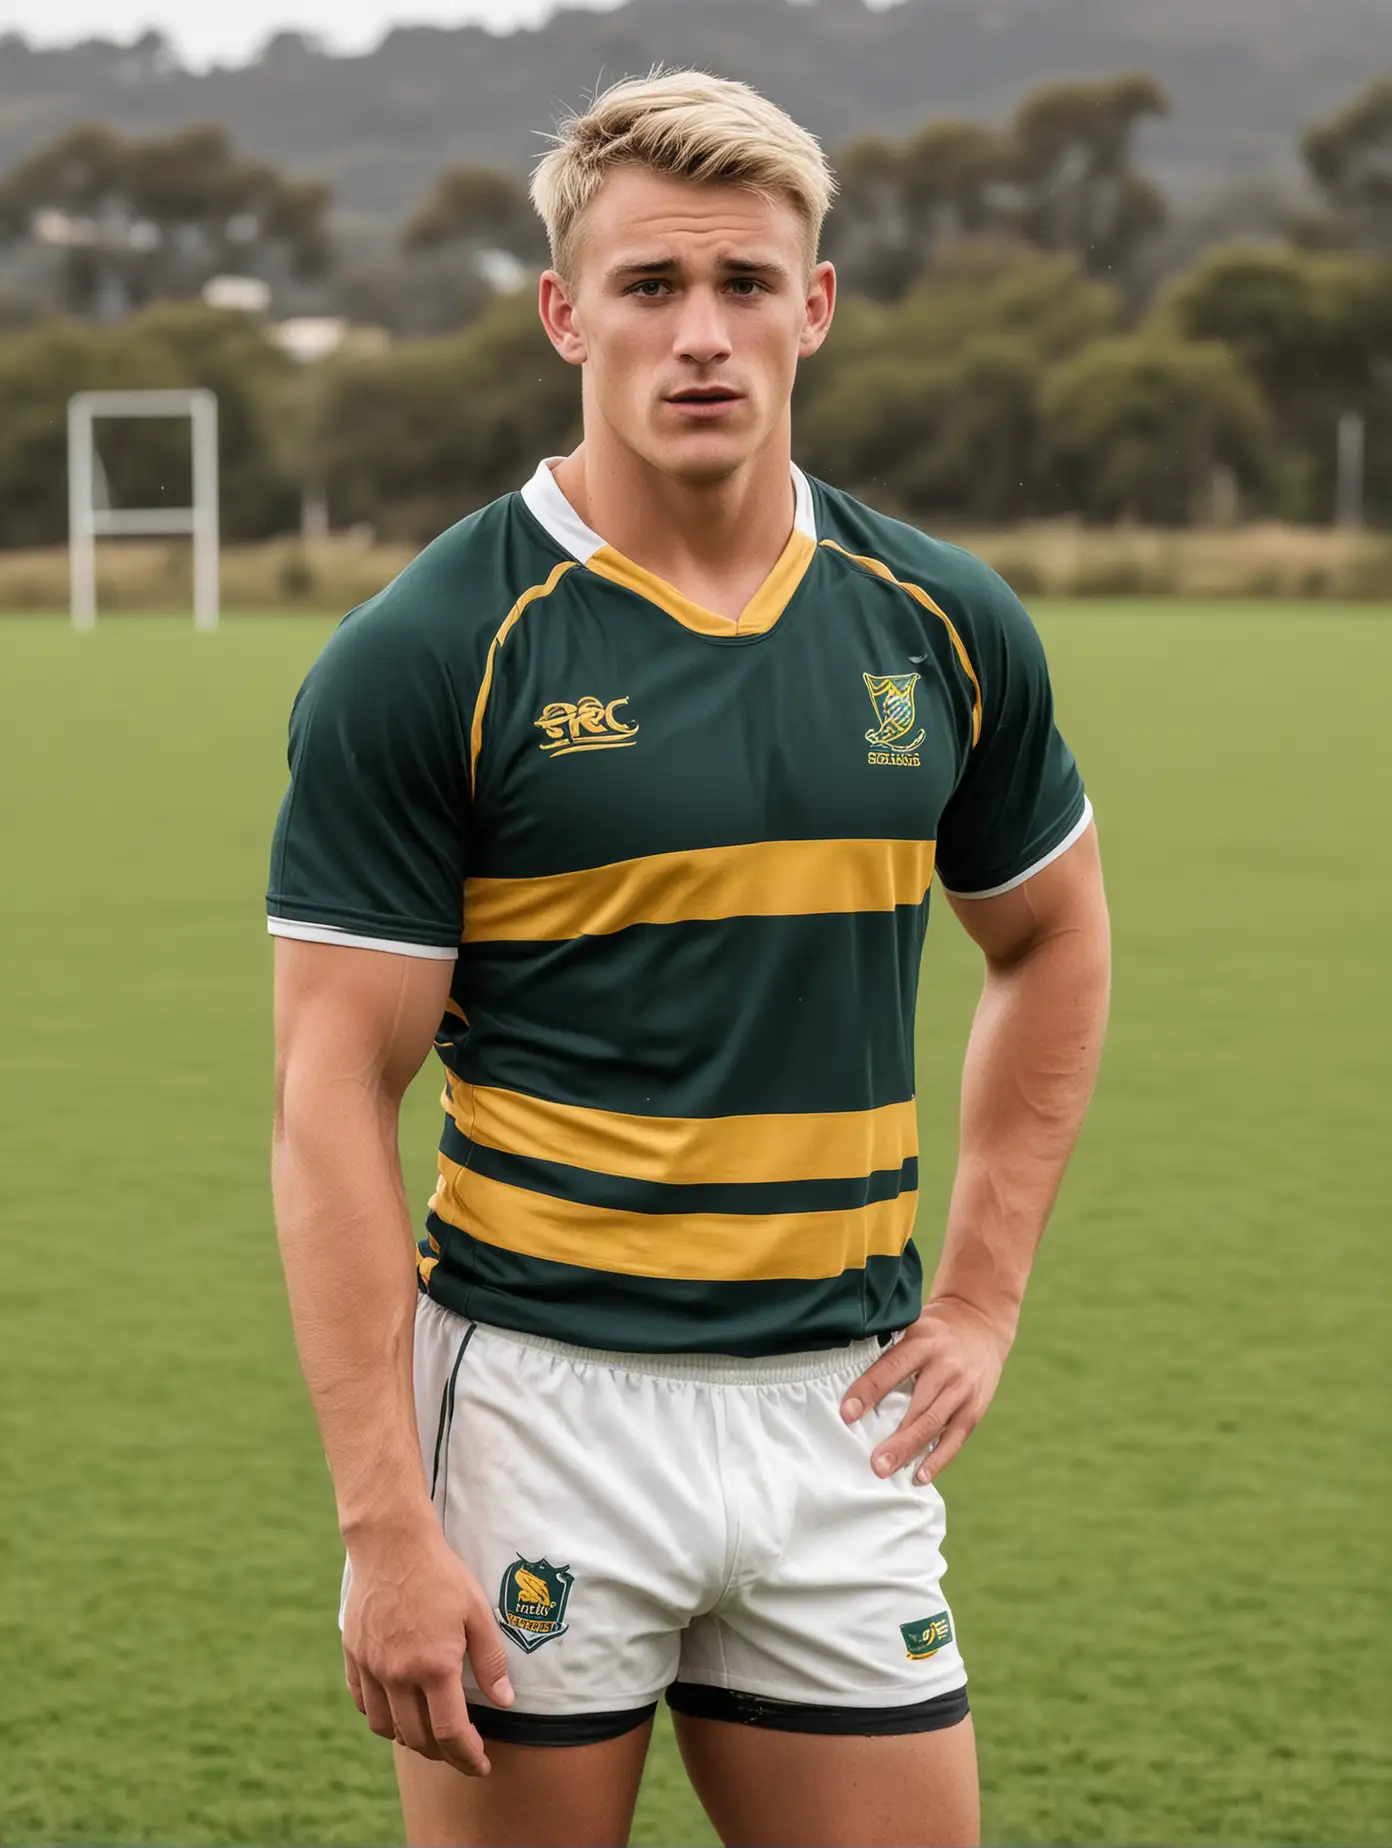 Australian Collegiate Rugby Player in Action on Rugby Pitch